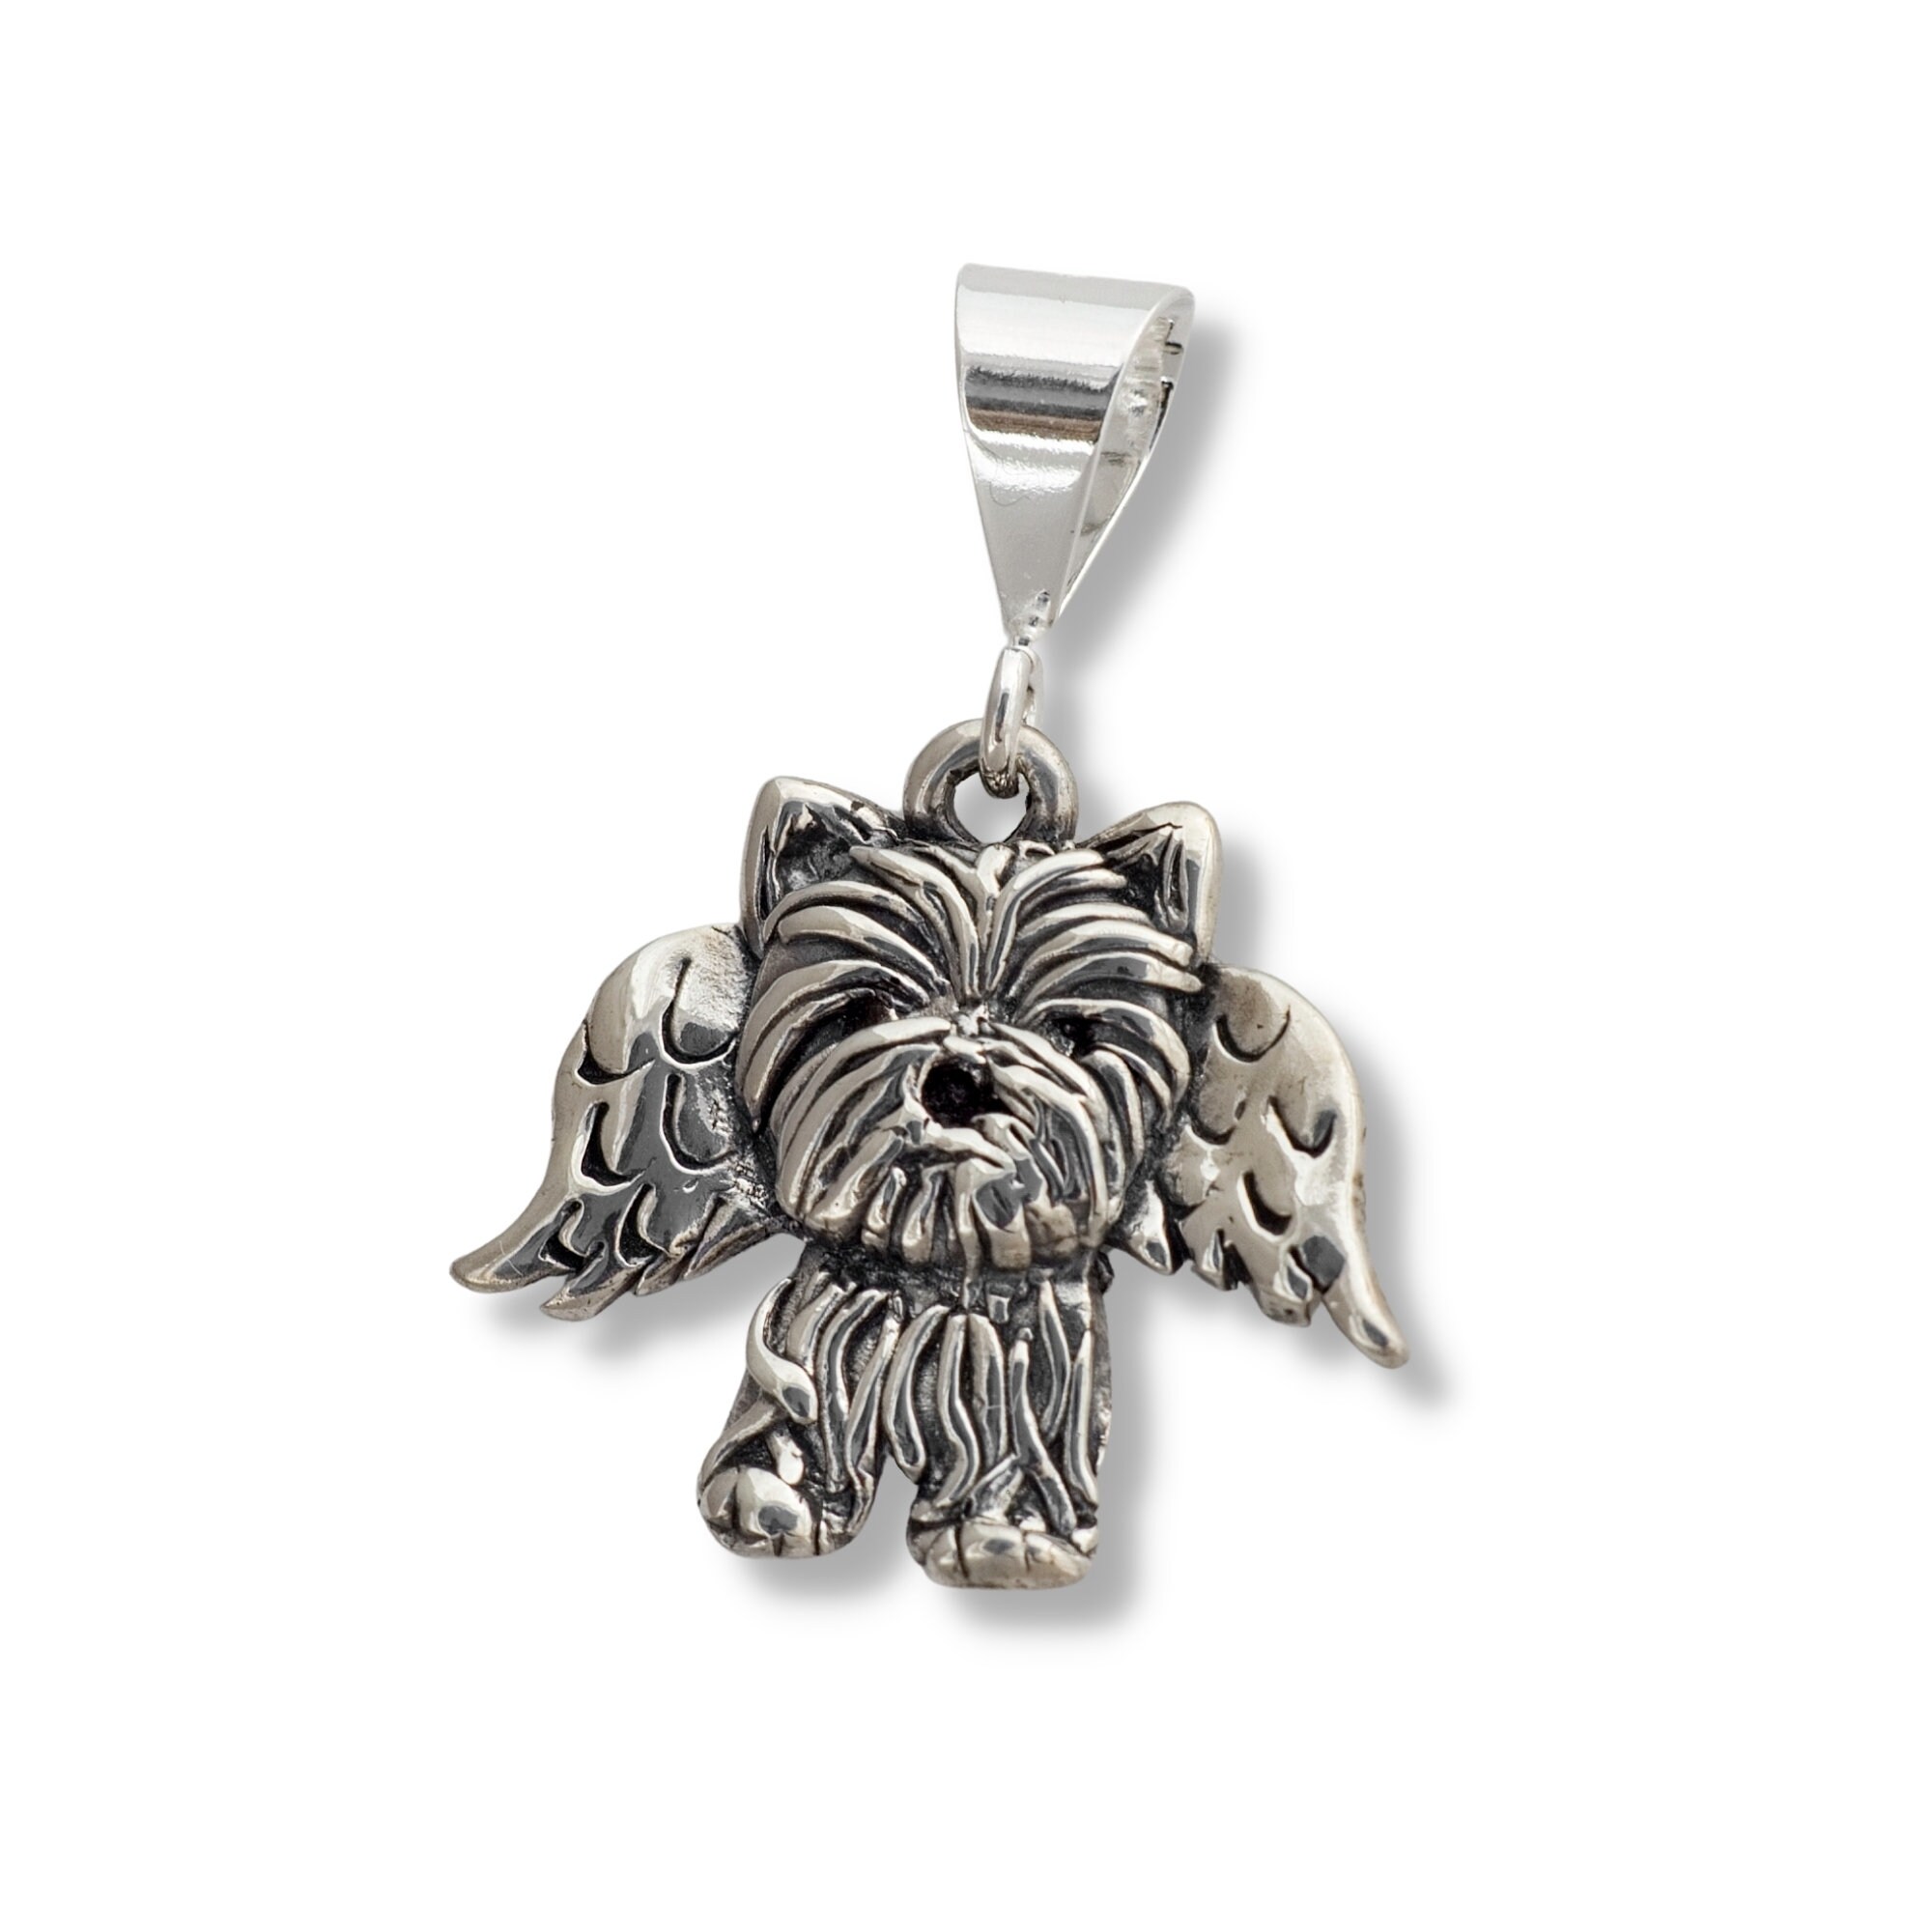 Sterling Silver On Box Chain Dog Lovers!! Yorkie or Schnauzer Lover this Pendant is for YOU